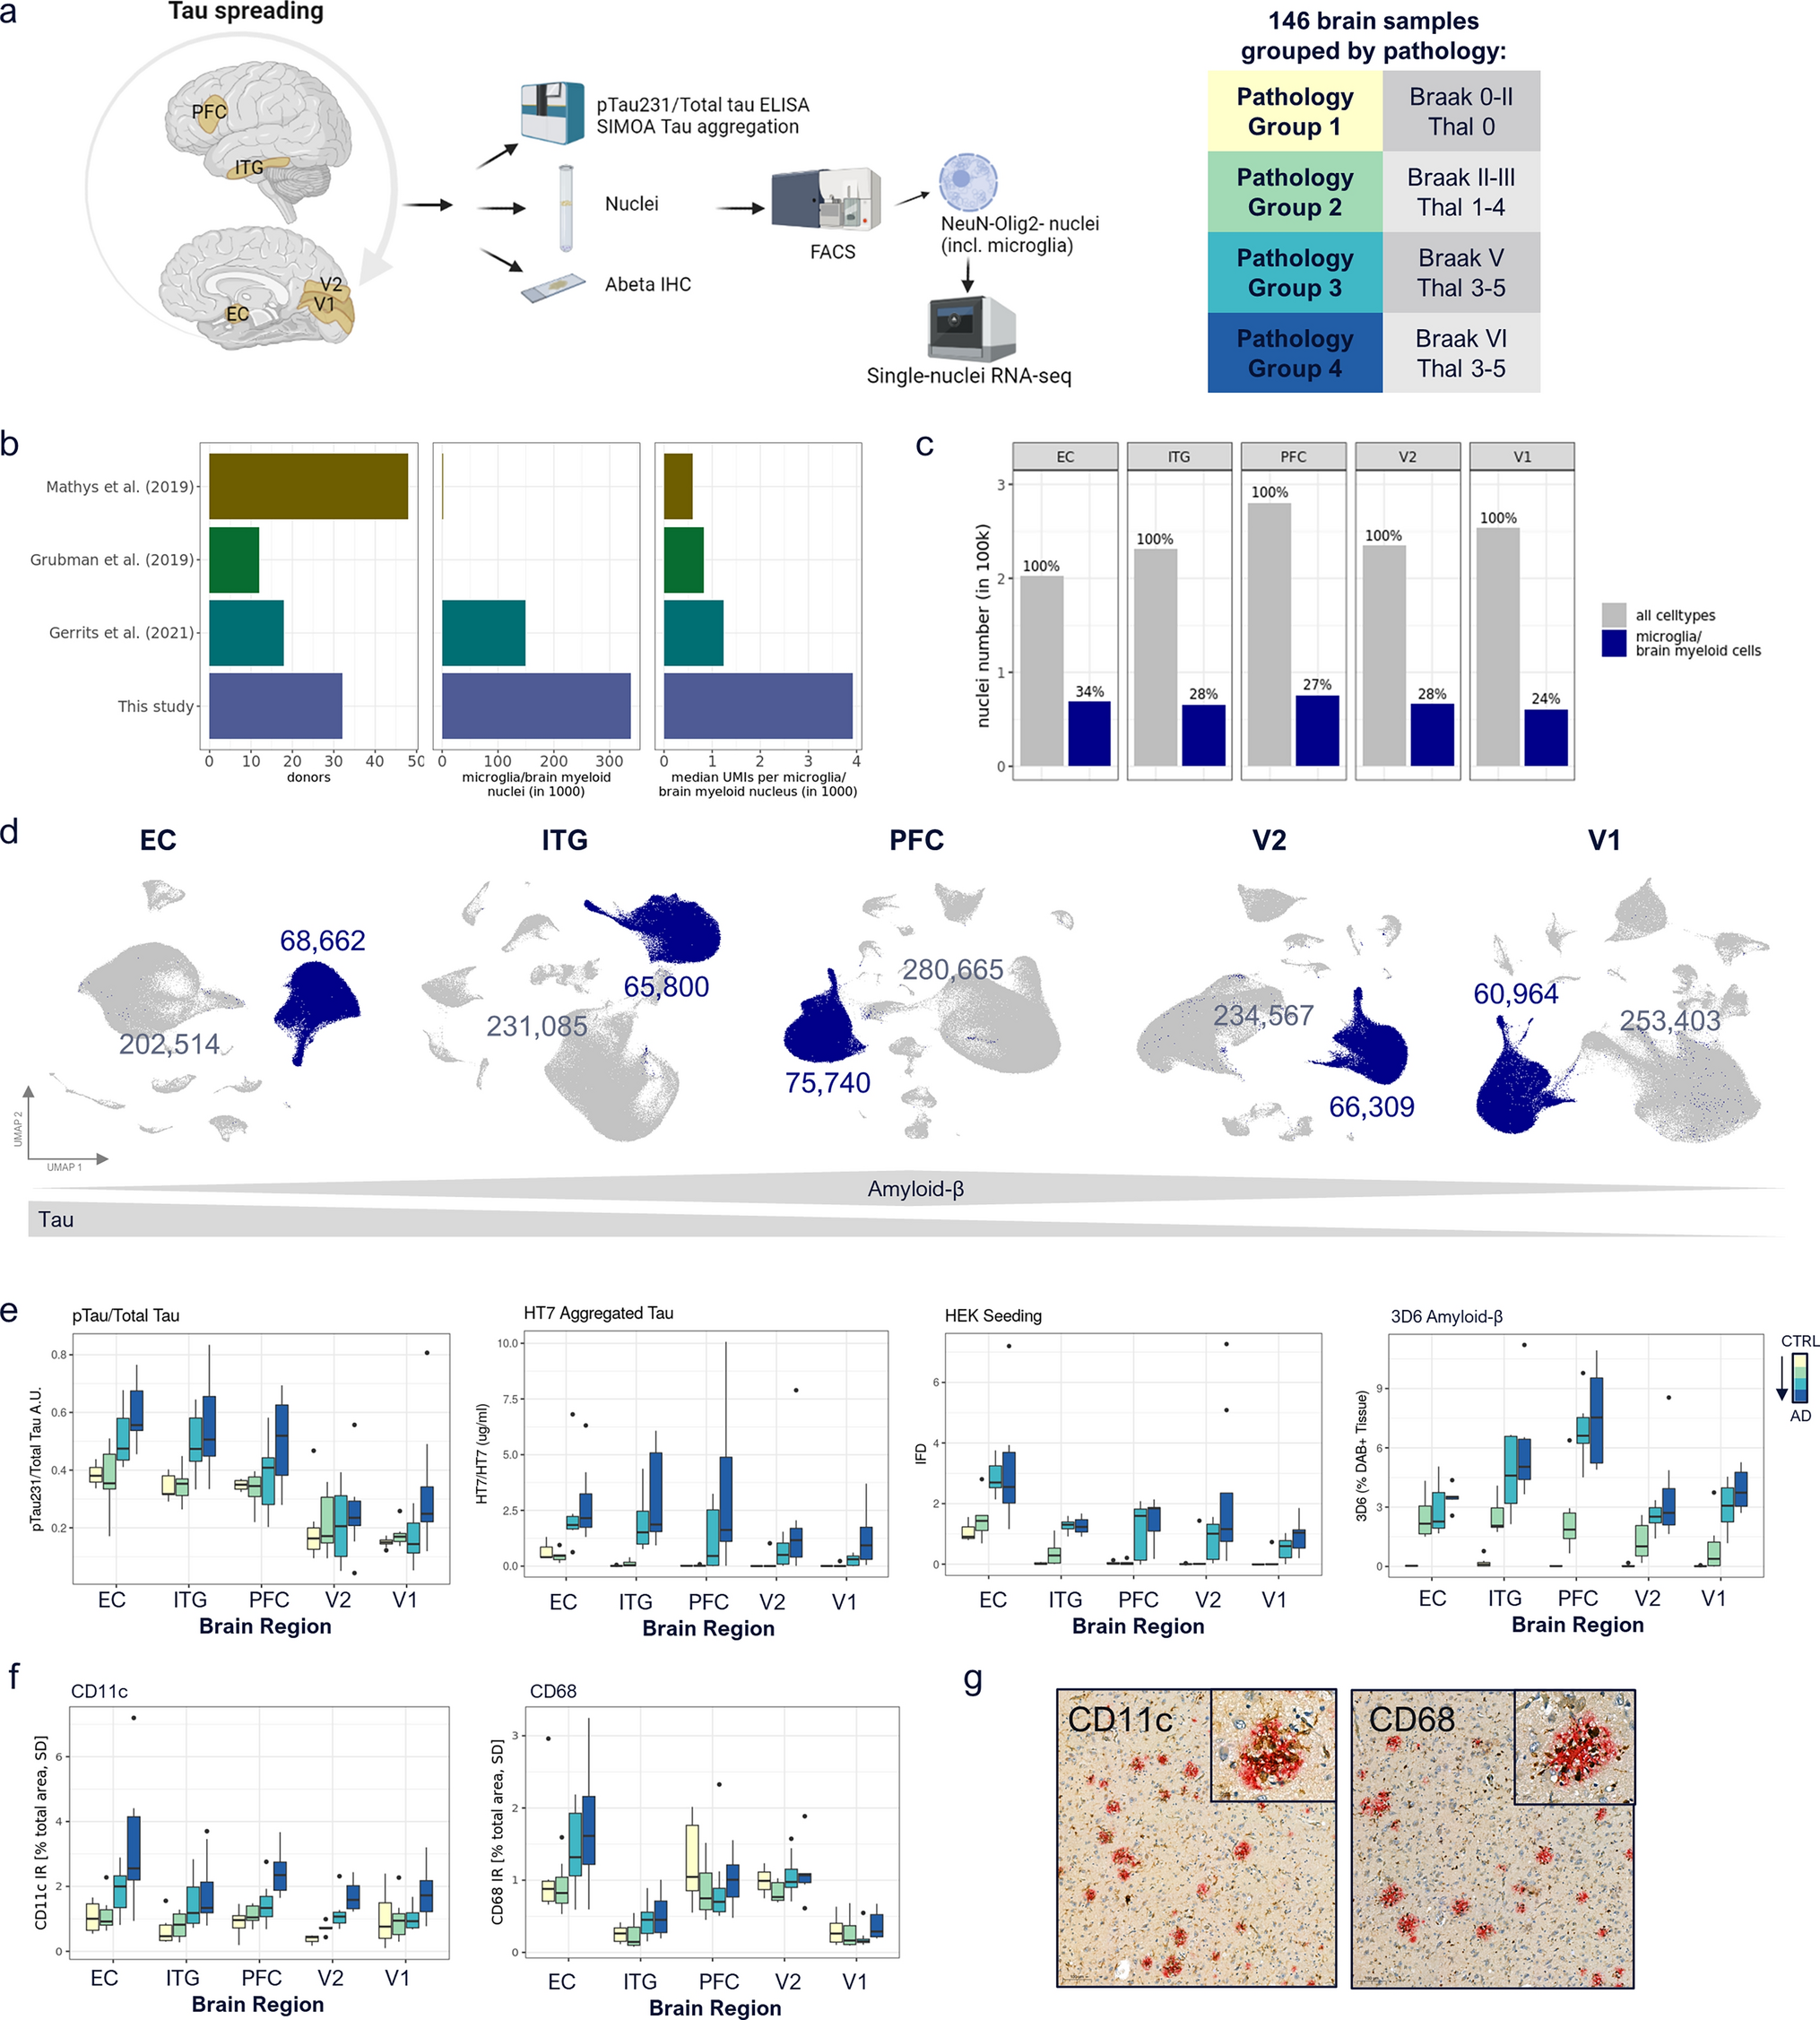 Landscape of brain myeloid cell transcriptome along the spatiotemporal progression of Alzheimer’s disease reveals distinct sequential responses to Aβ and tau